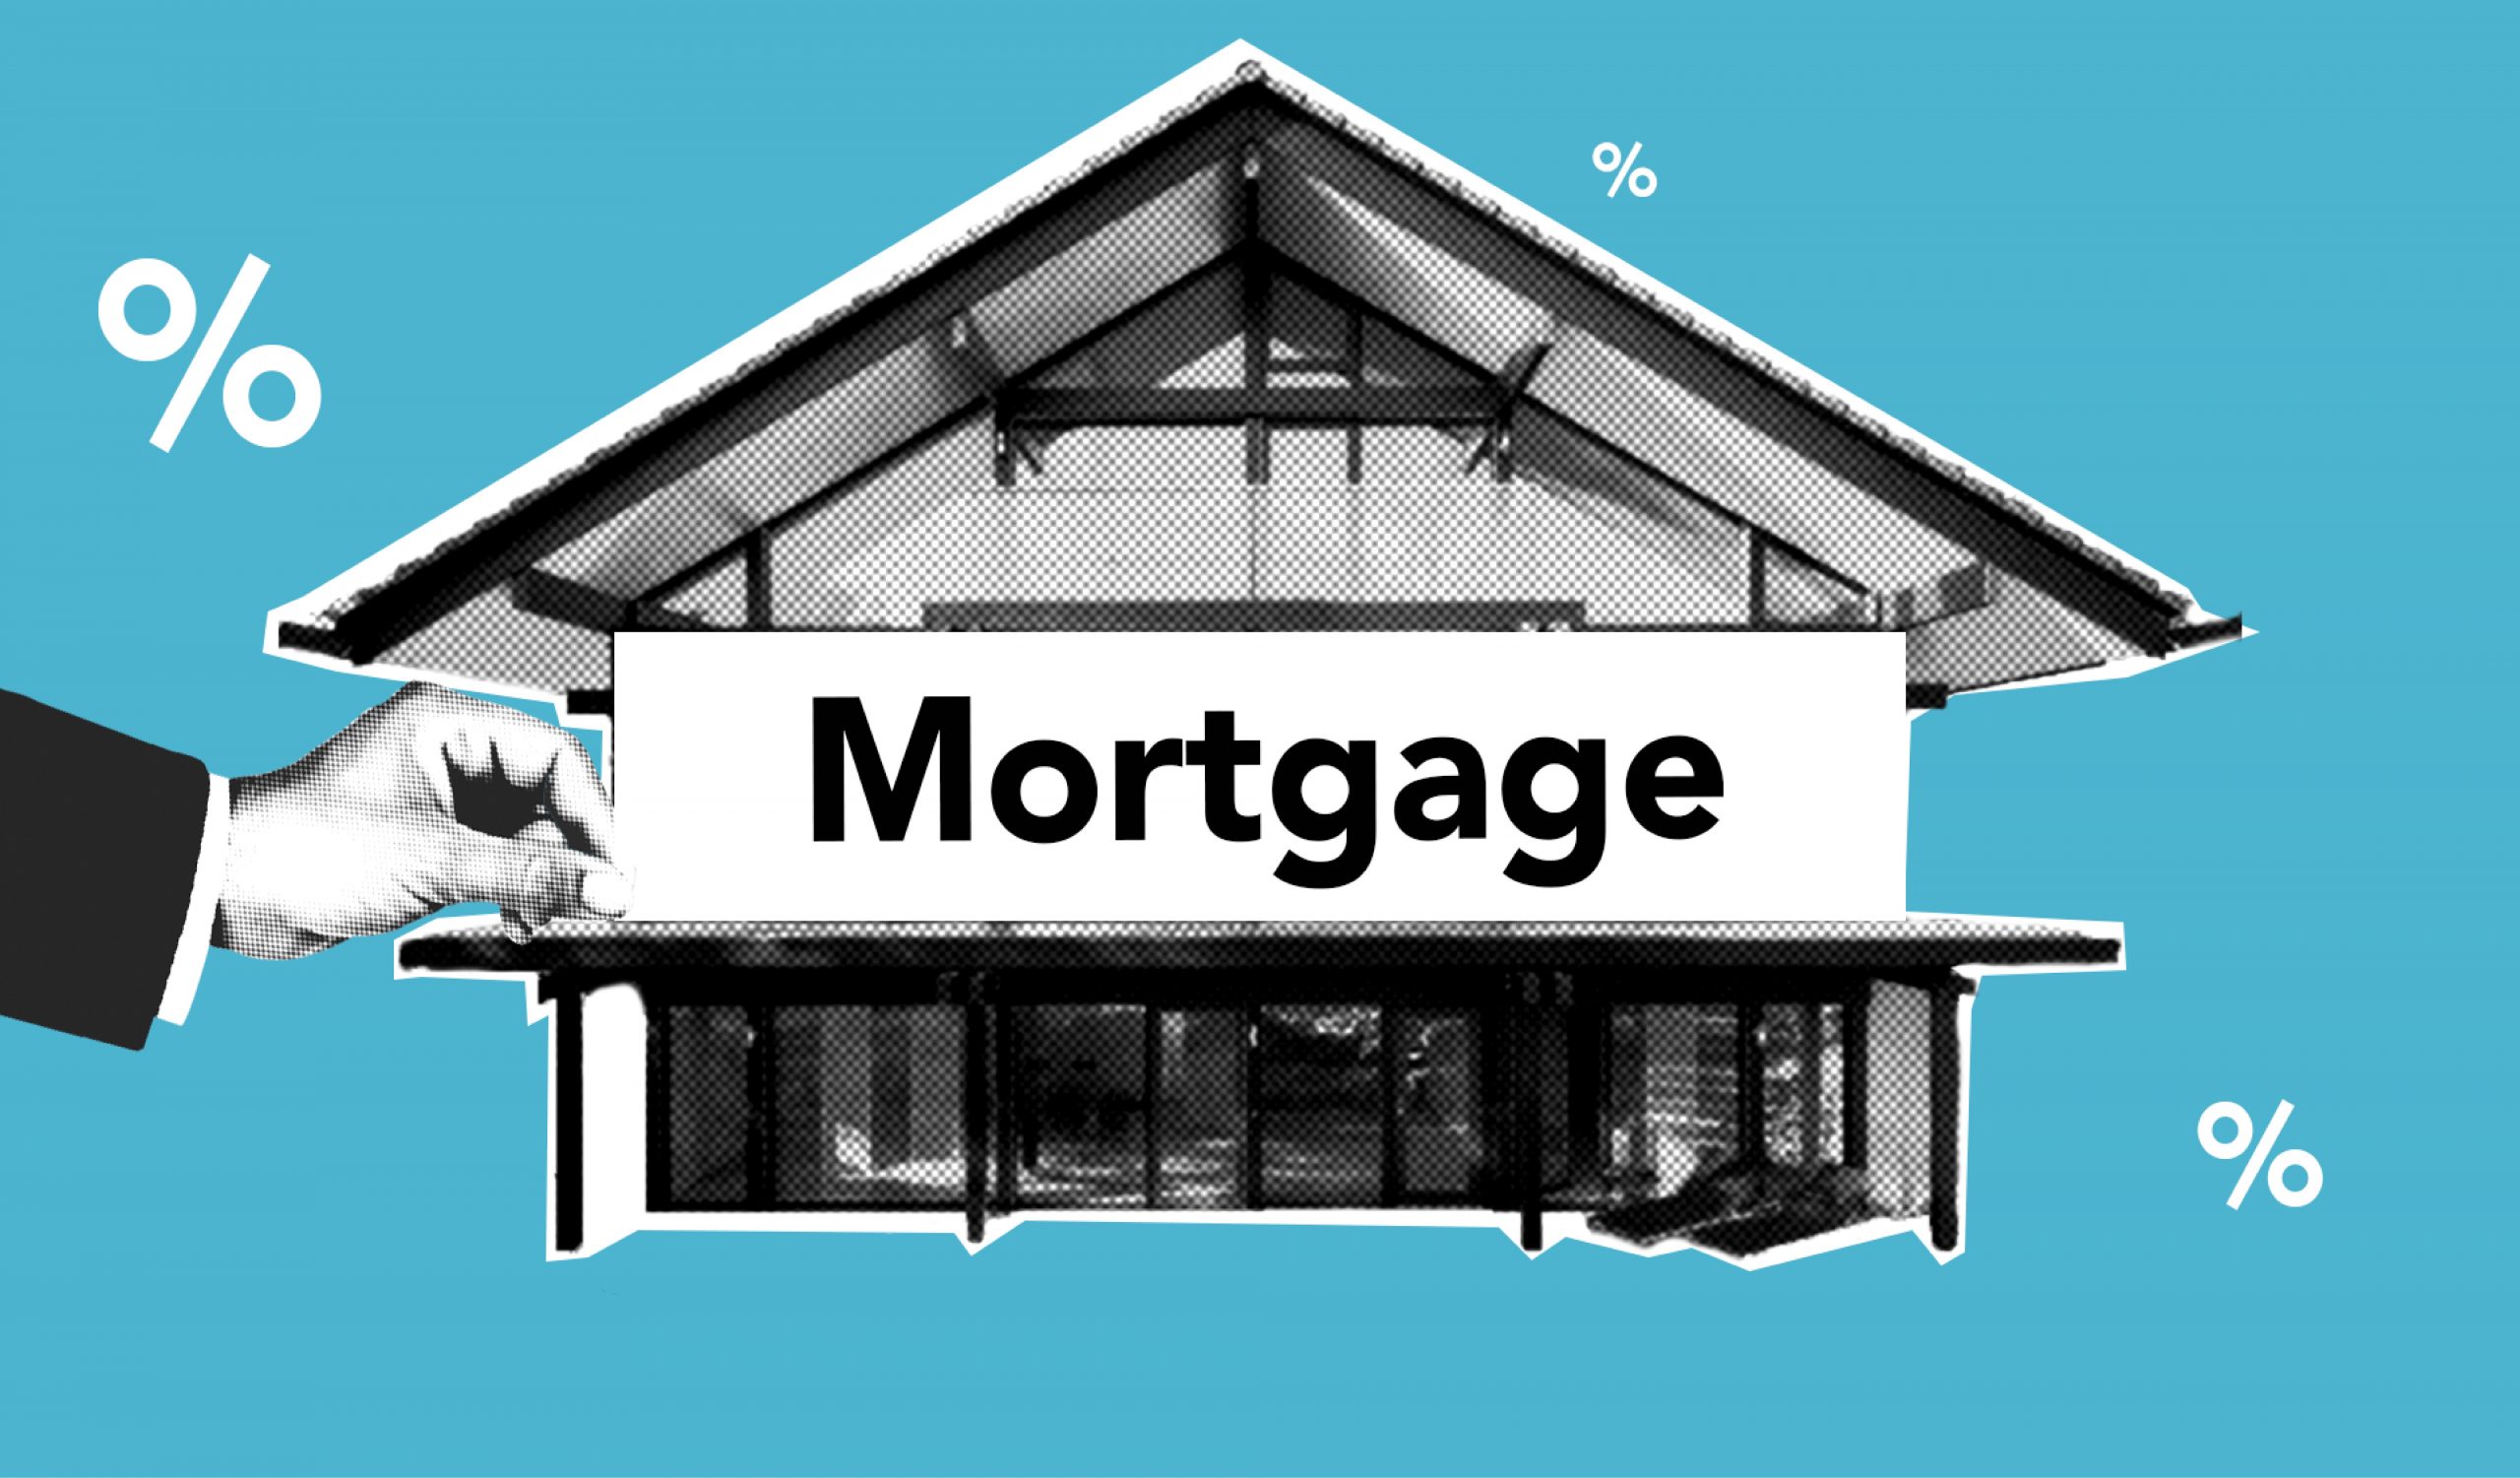 Adjustable Rate Mortgages - The Basics